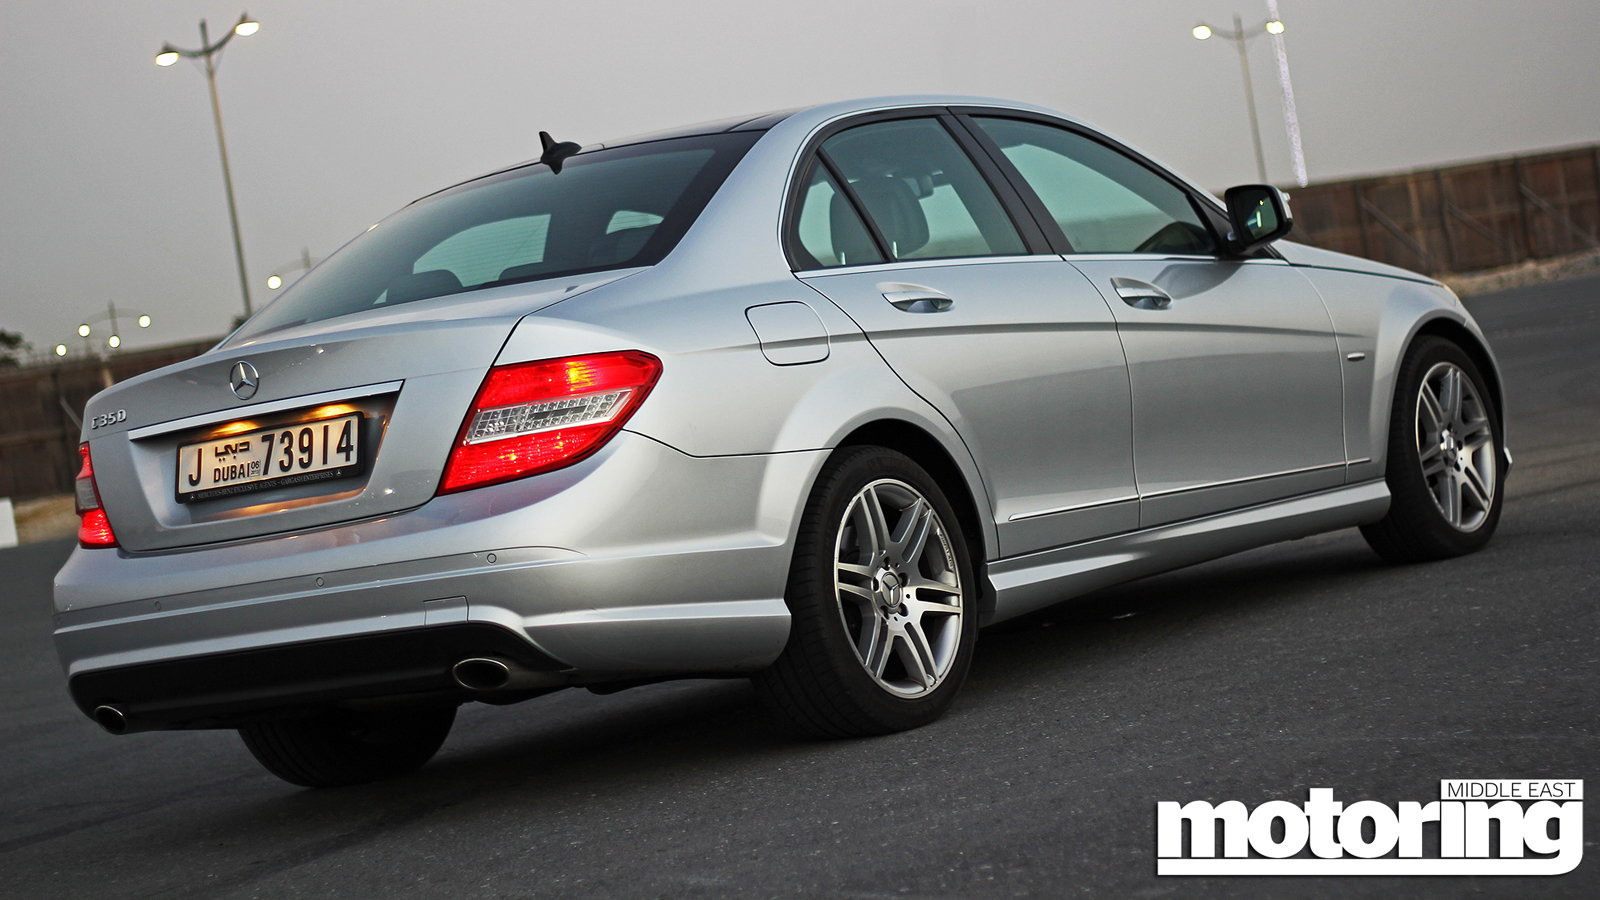 Reasons to Buy a W204 Mercedes C-Class